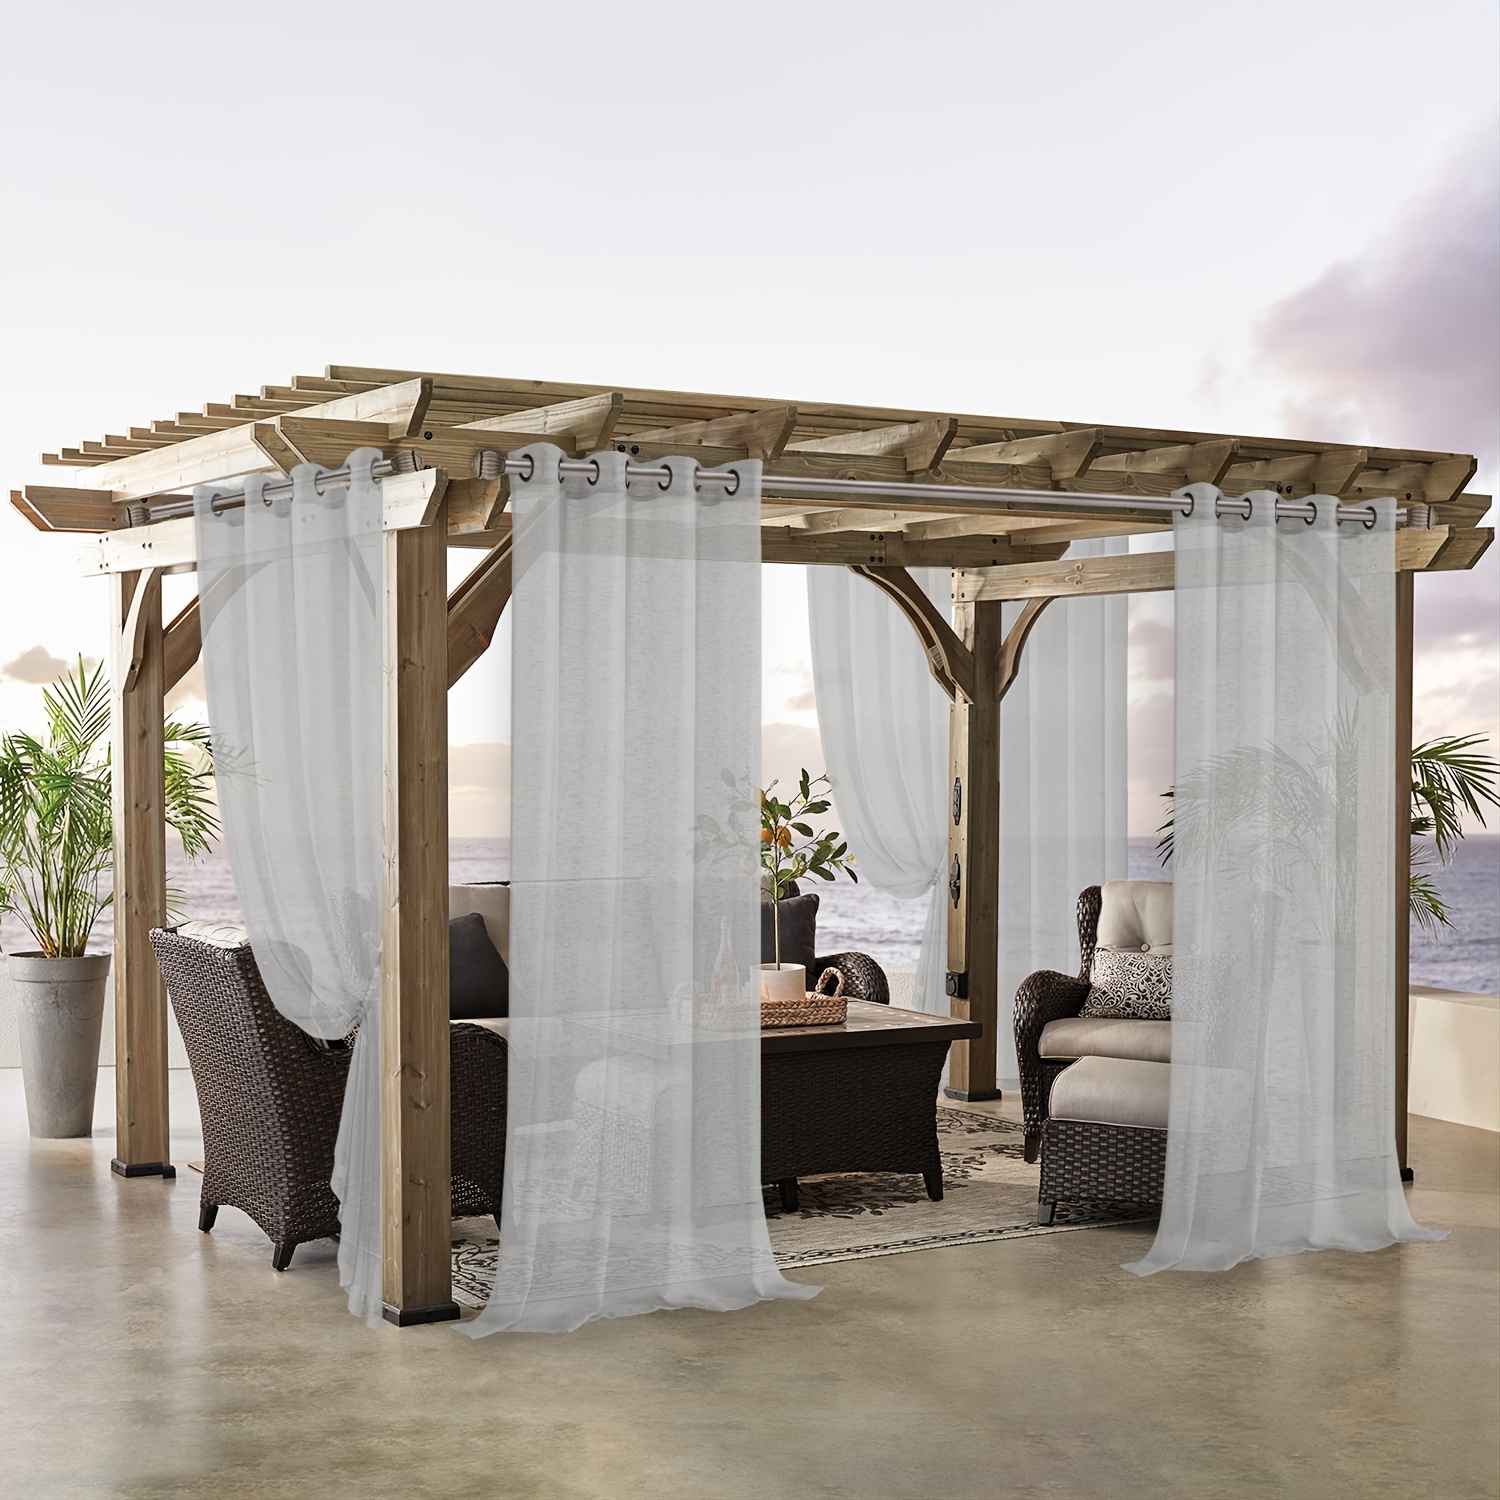 1 Panel Linen Look Outdoor Curtains For Patio Waterproof Sheer Curtains For Pergola Porch Cabana And Gazebo Grommet Indoor Outdoor Voile Sheer Drapes